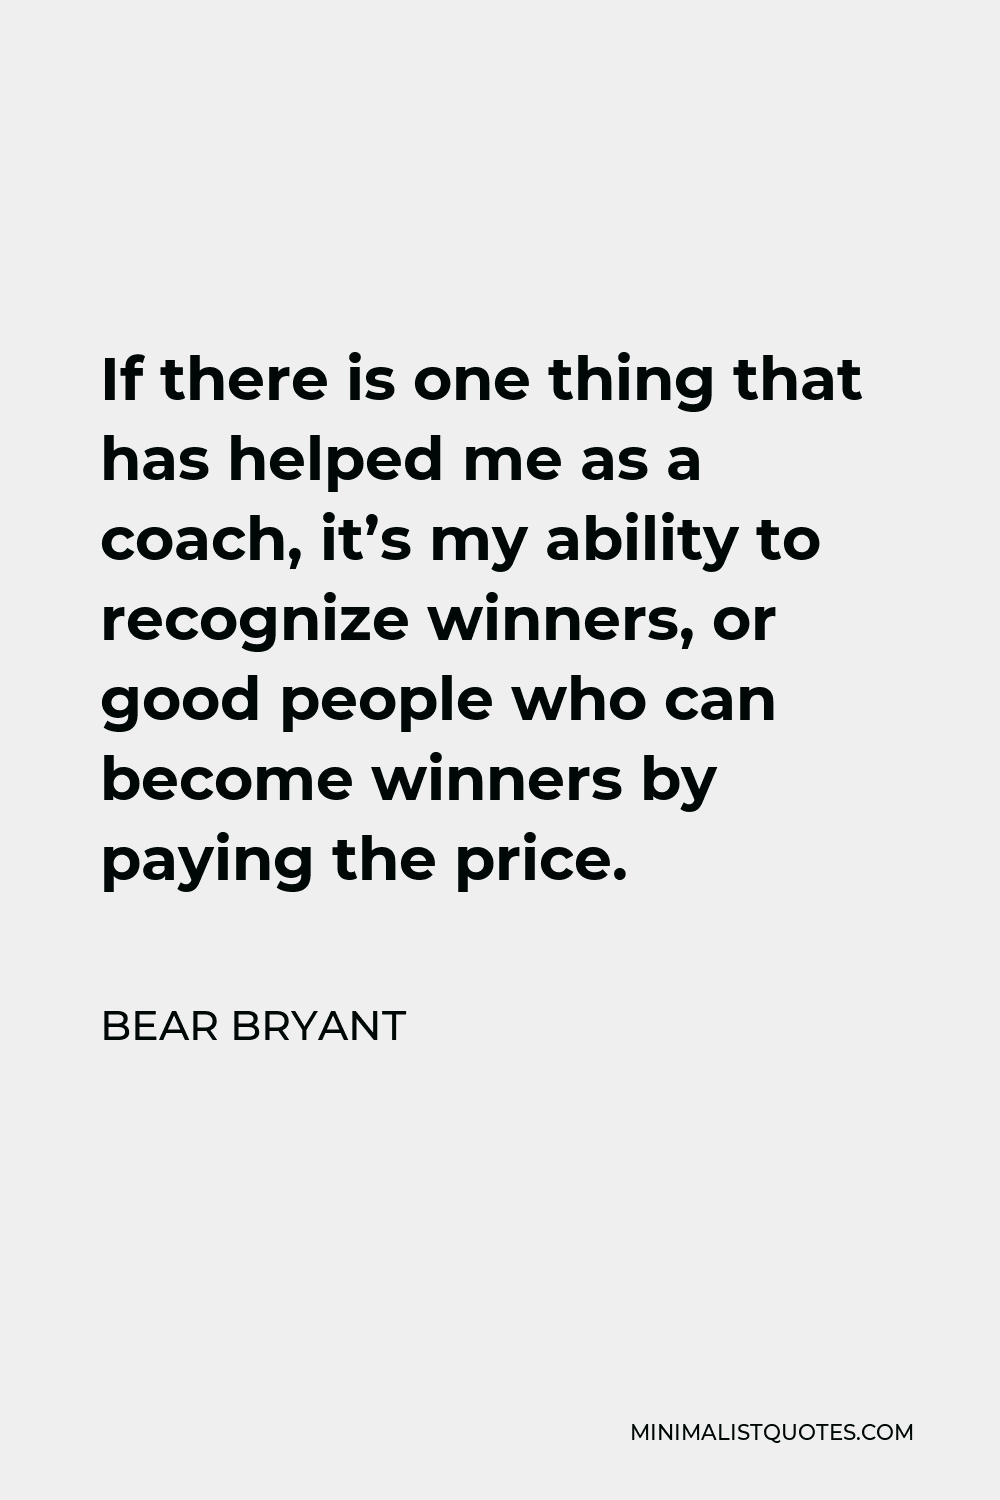 Bear Bryant Quote - If there is one thing that has helped me as a coach, it’s my ability to recognize winners, or good people who can become winners by paying the price.